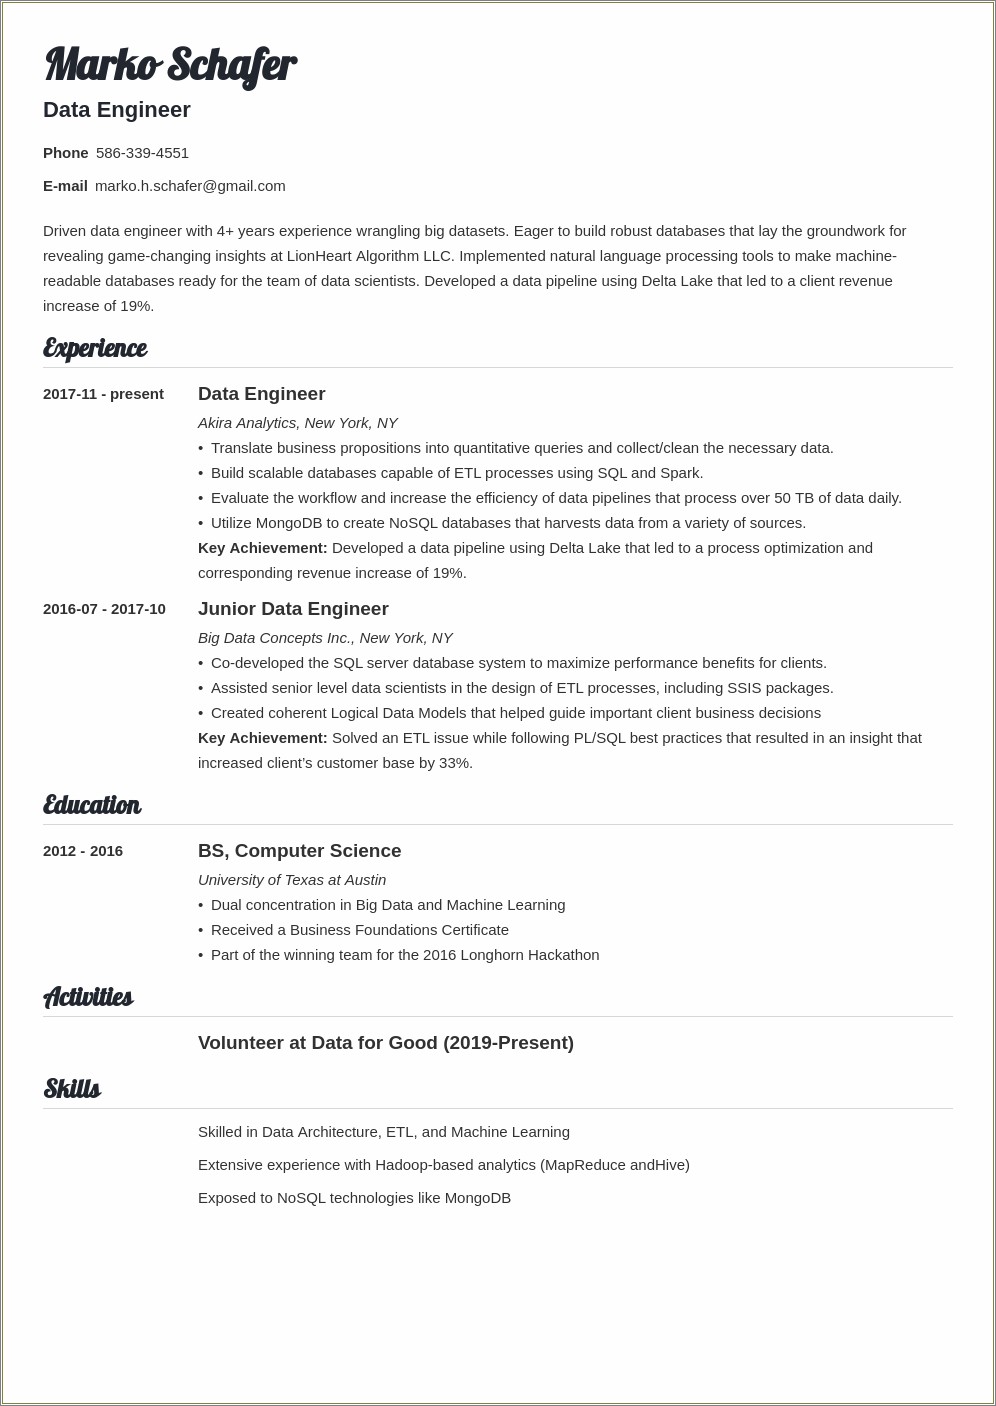 Having Led Teams During Work And Education Resume